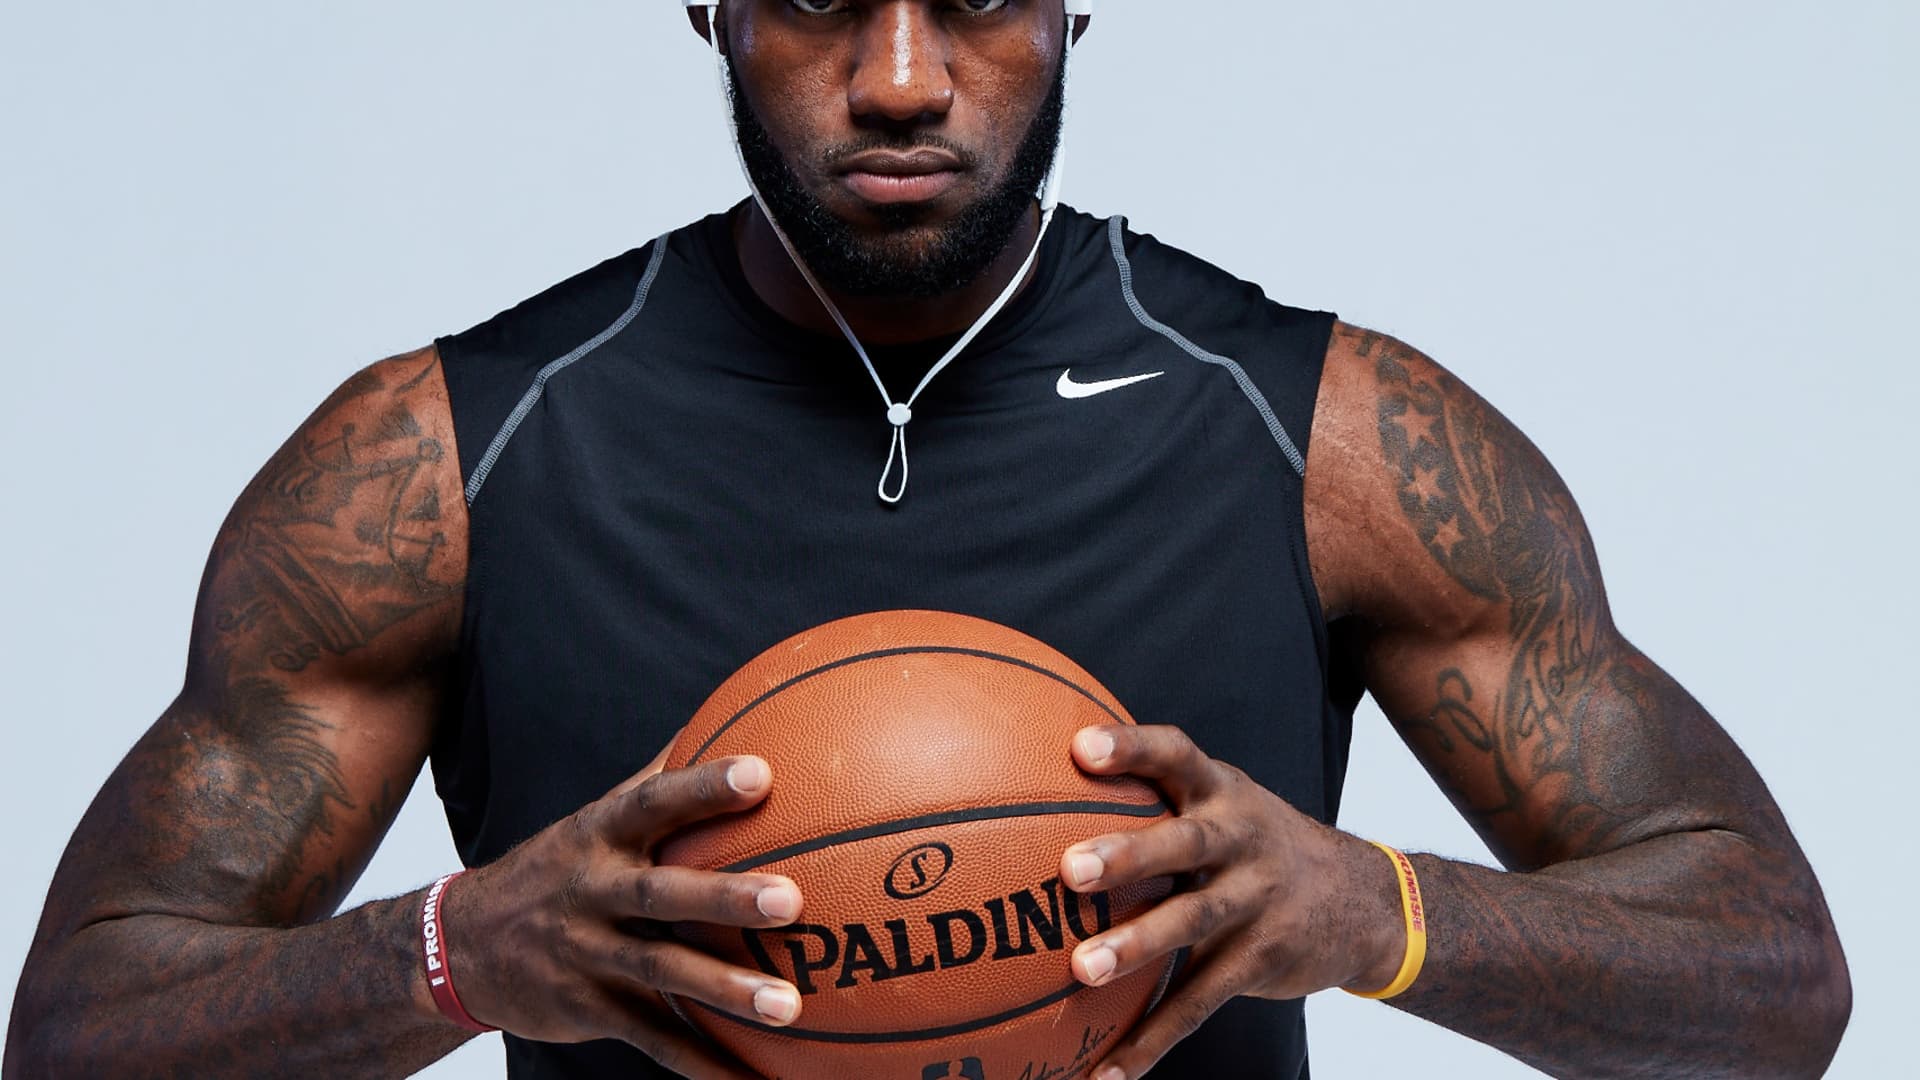 Apple-owned Beats By Dre is now the NBA's official headphones partner